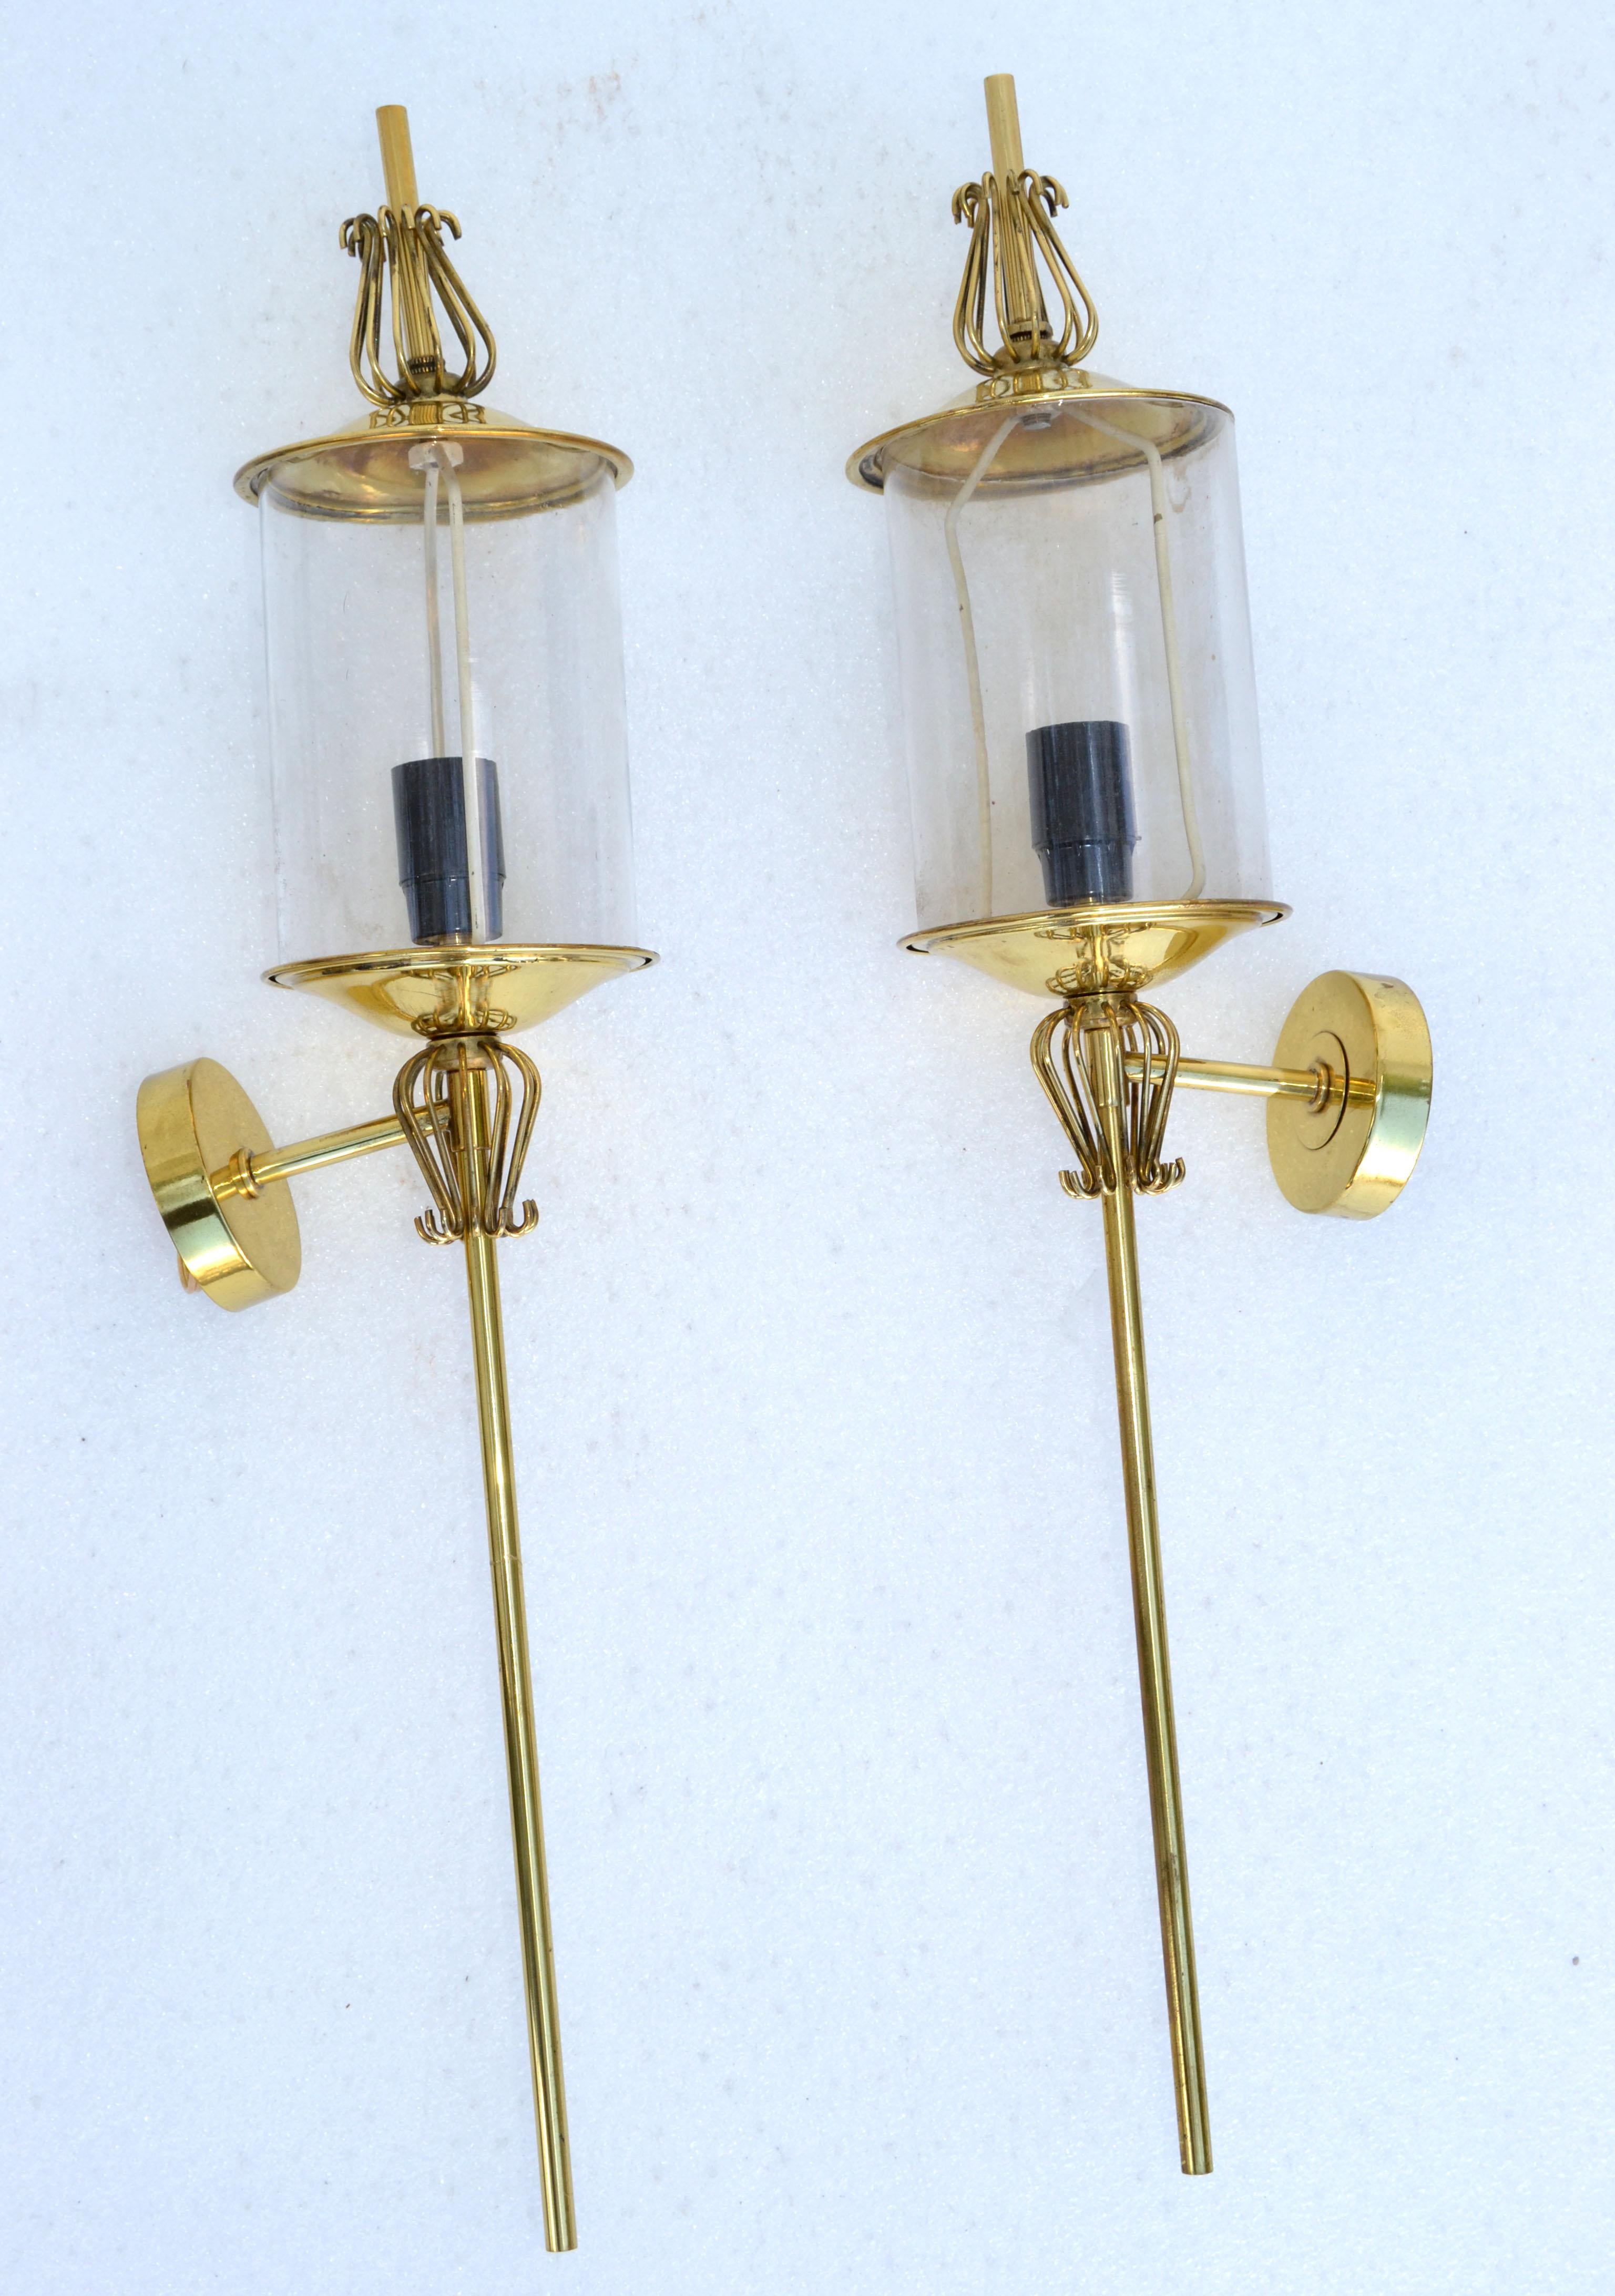 Pair of Maison Lunel Brass & Glass Sconces, Wall Lamp French Mid-Century Modern For Sale 4